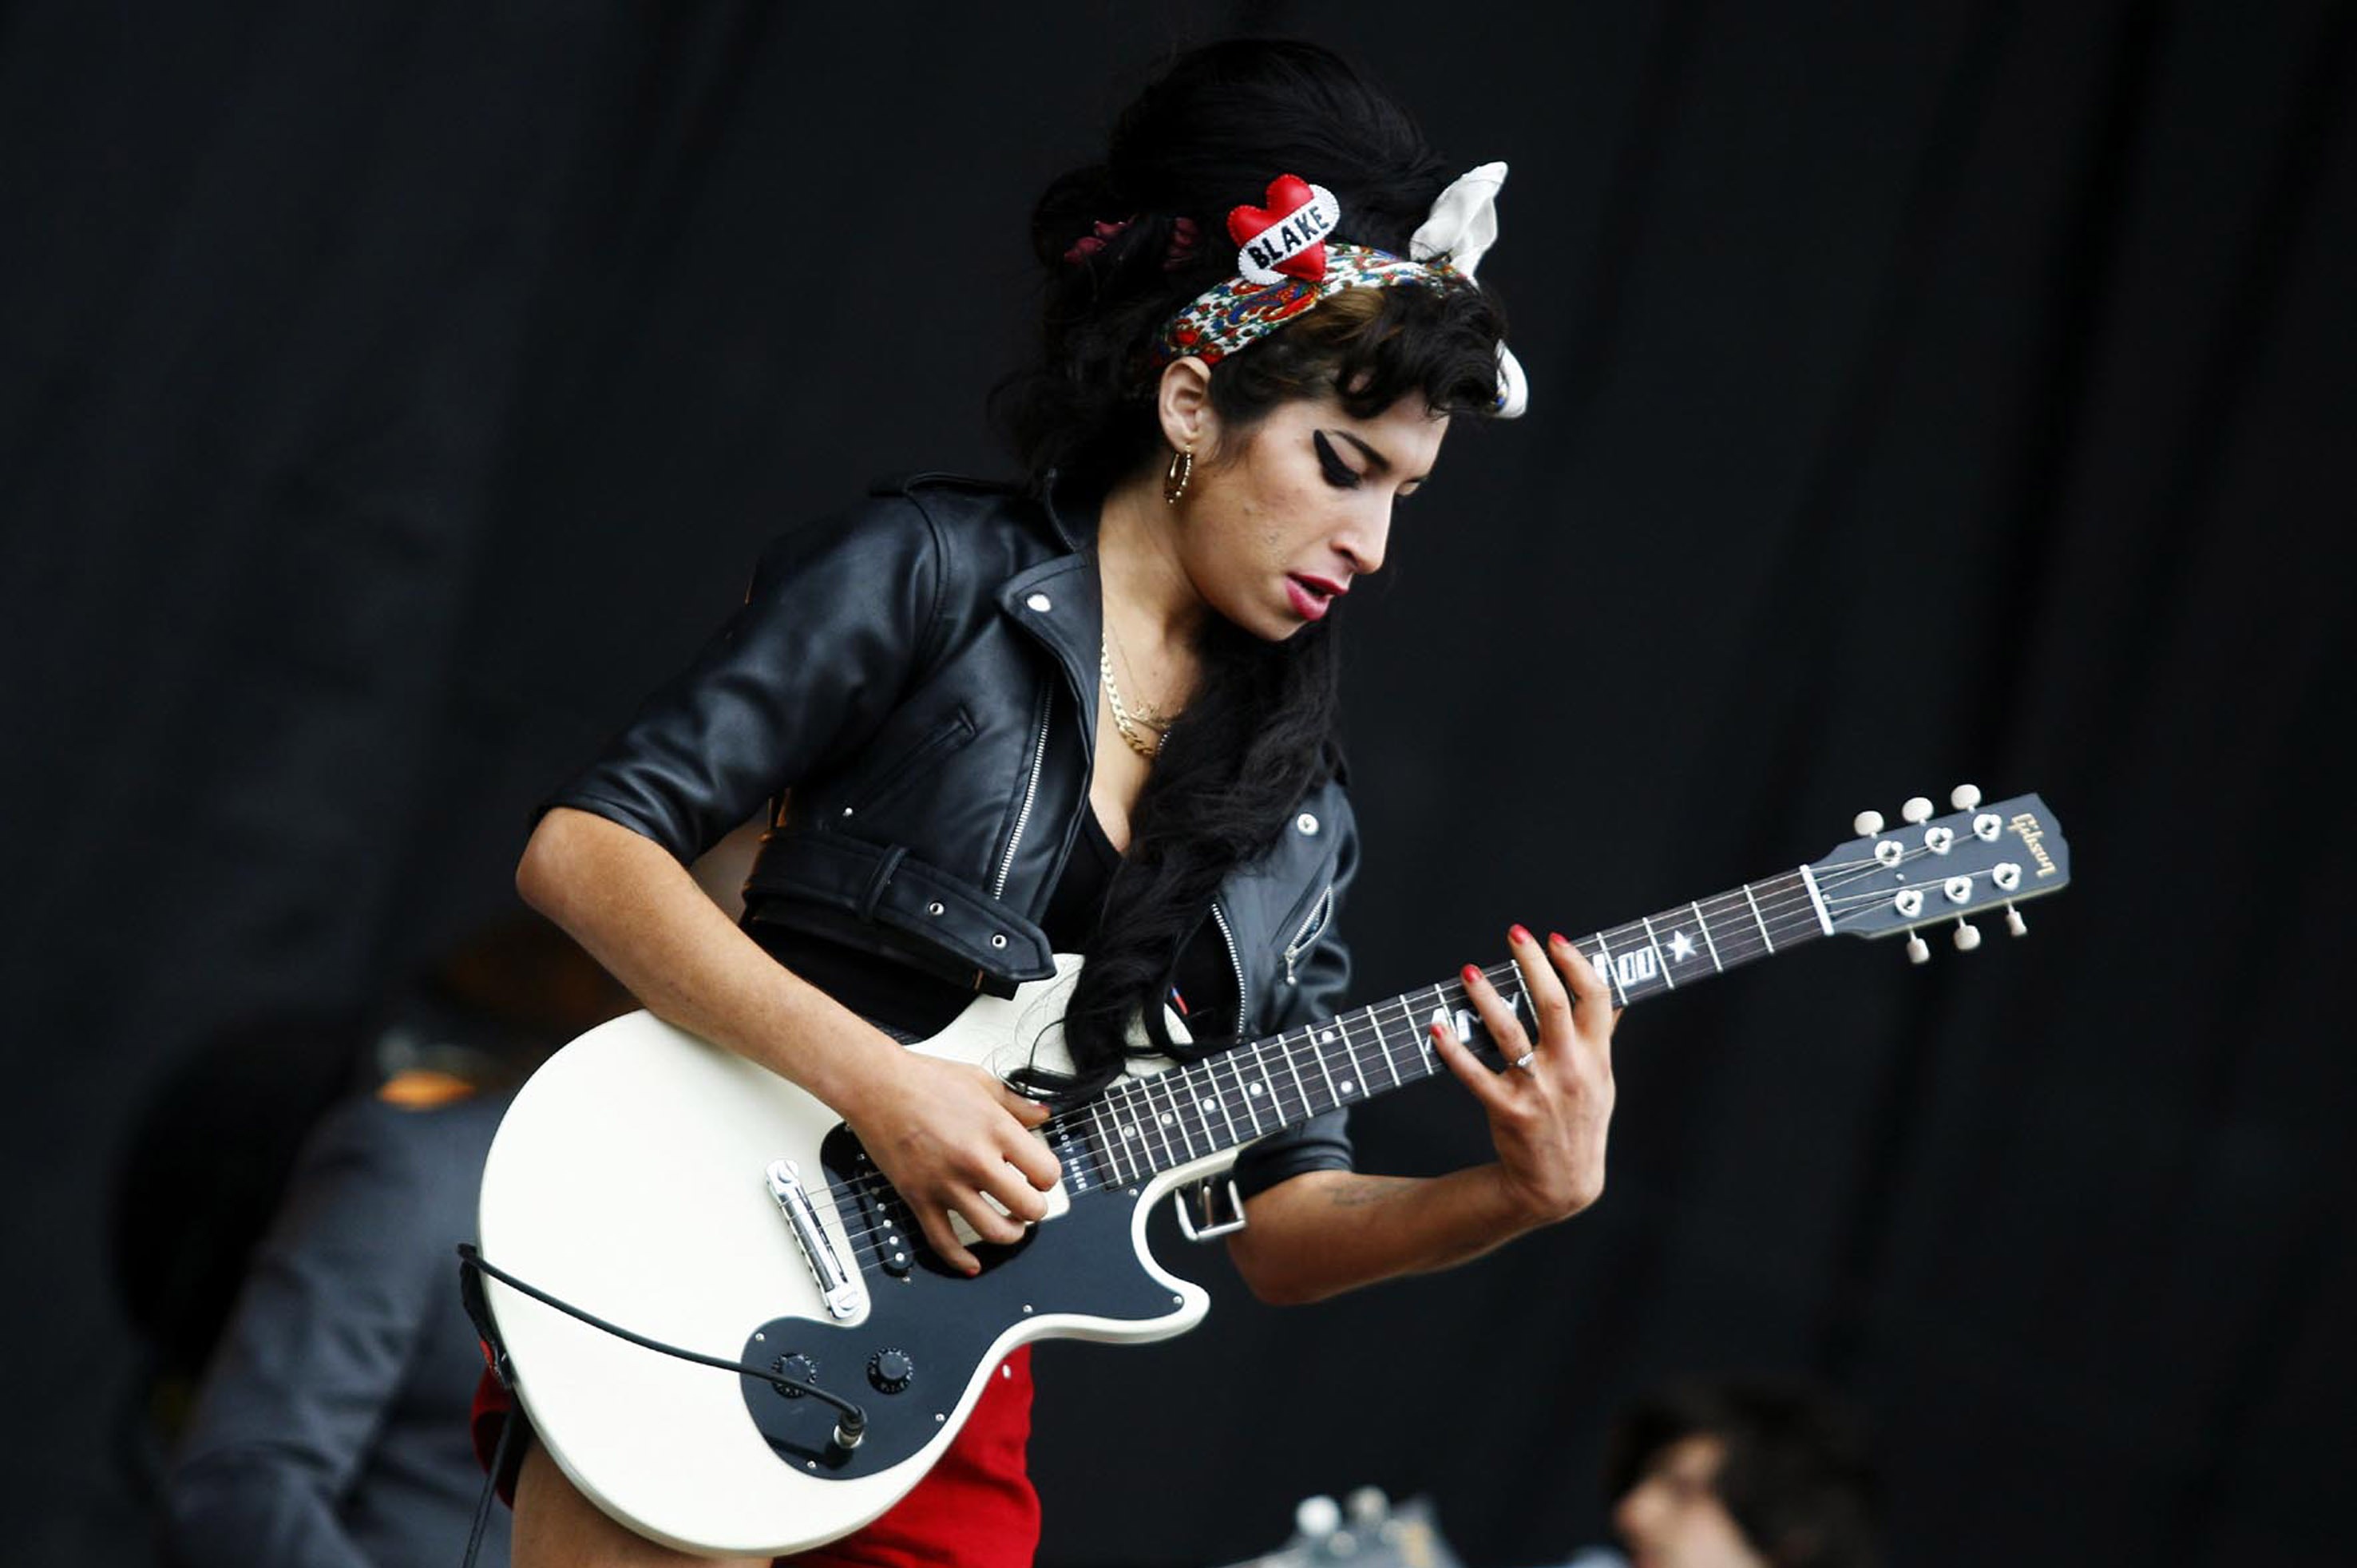 Amy performing at T in the Park, Scotland, in 2008